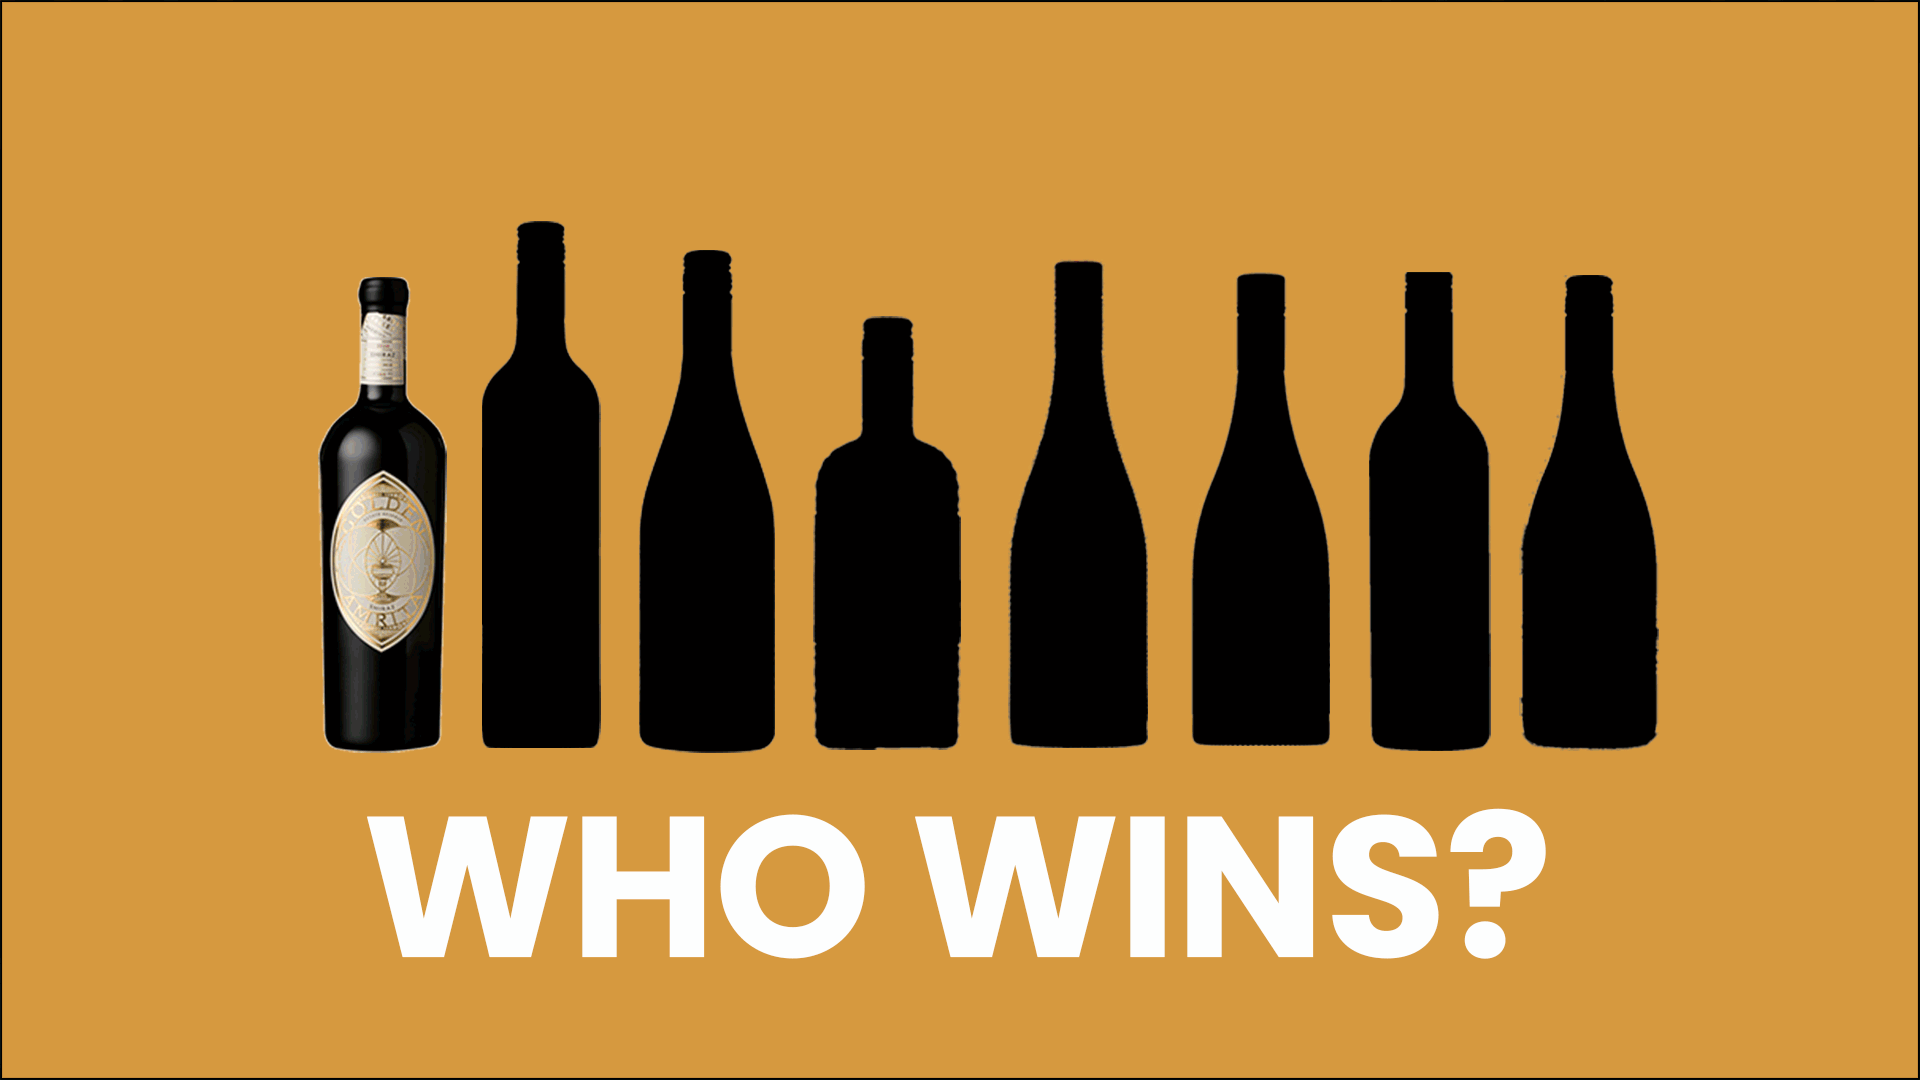 PACKWINE People’s Choice Award now open – vote for your favourite design!